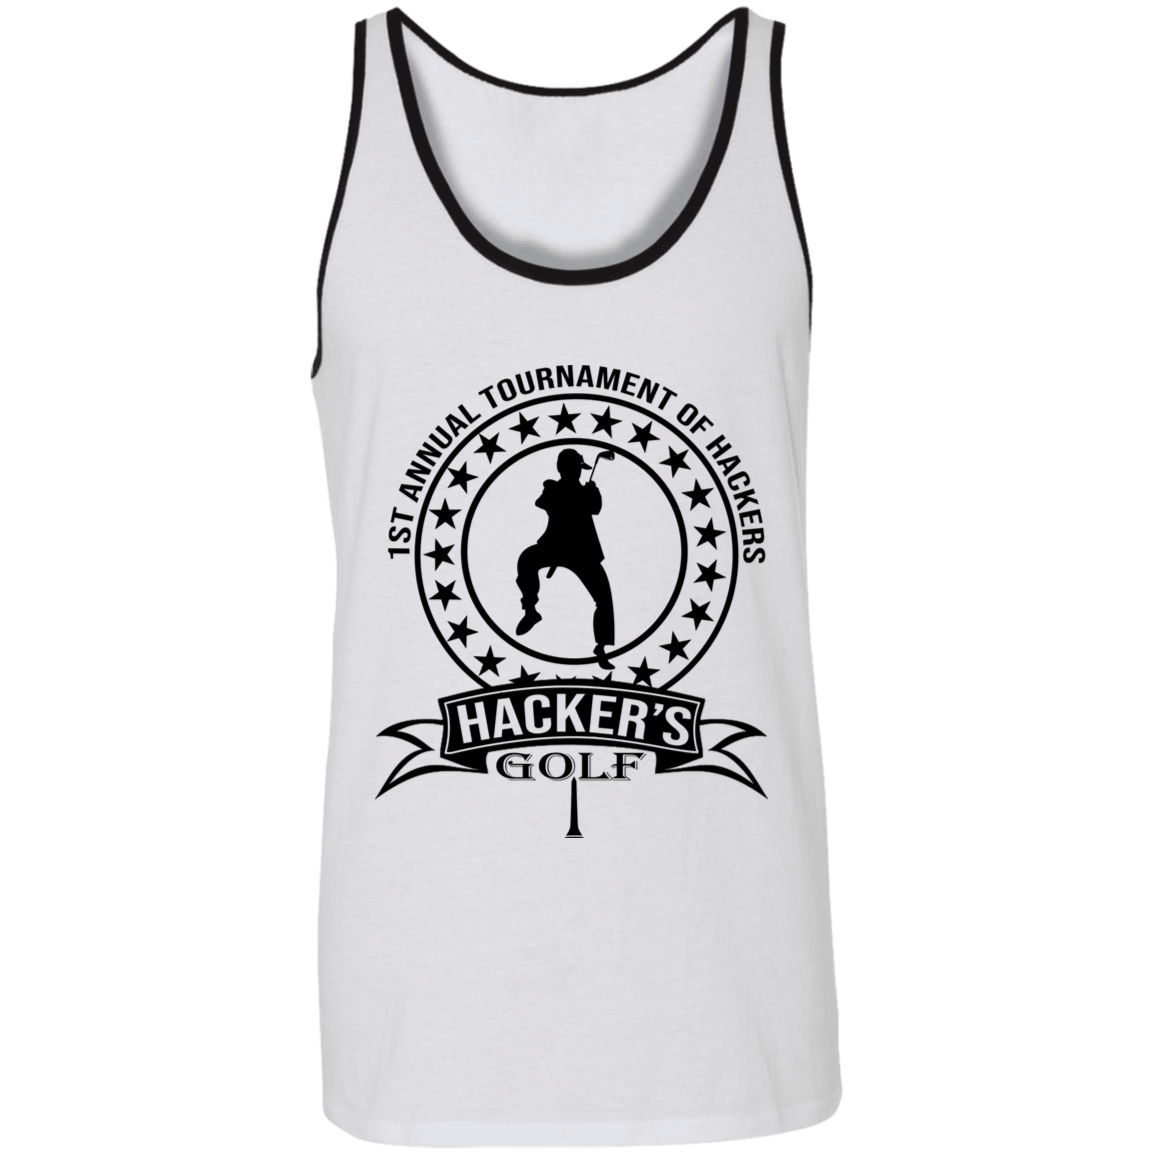 OPG Custom Design #20. 1st Annual Hackers Golf Tournament. 2 Tone Tank 100% Combed and Ringspun Cotton